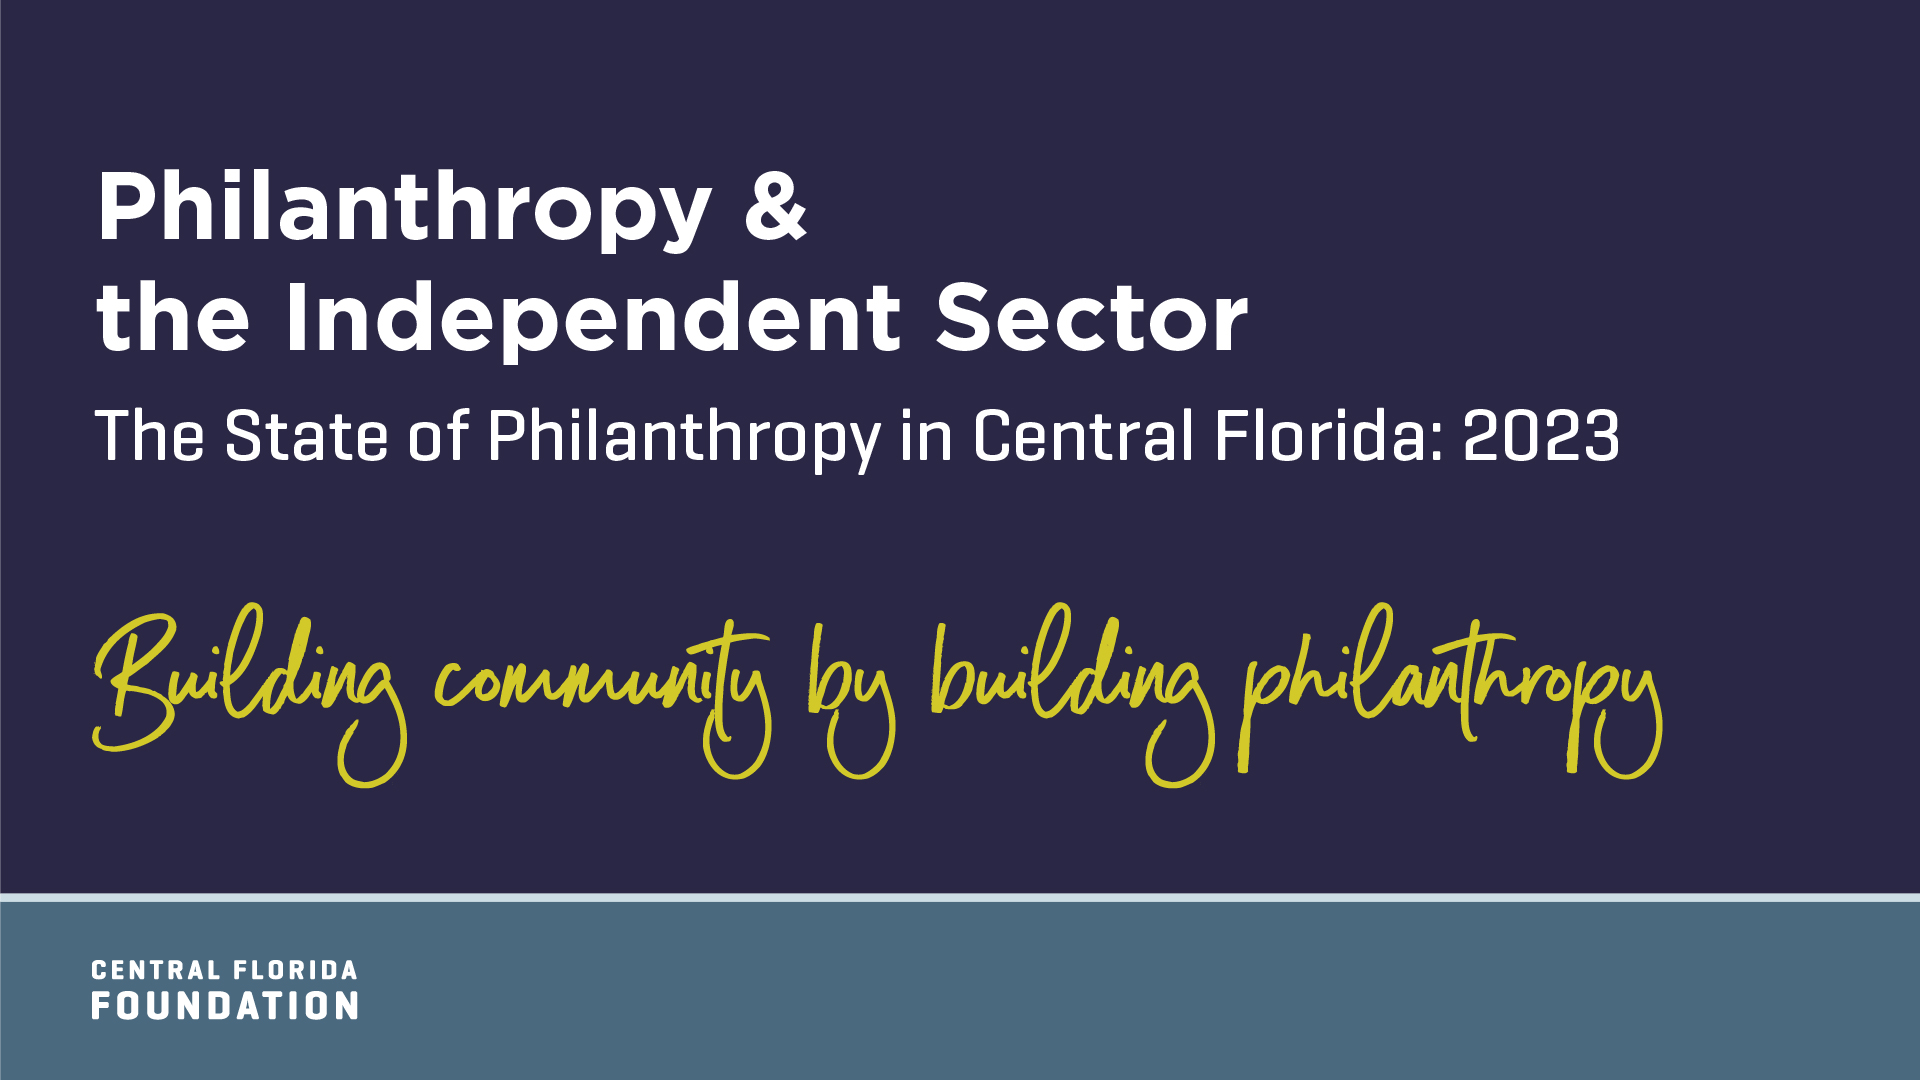 THE STATE OF PHILANTHROPY WITH MARK BREWER